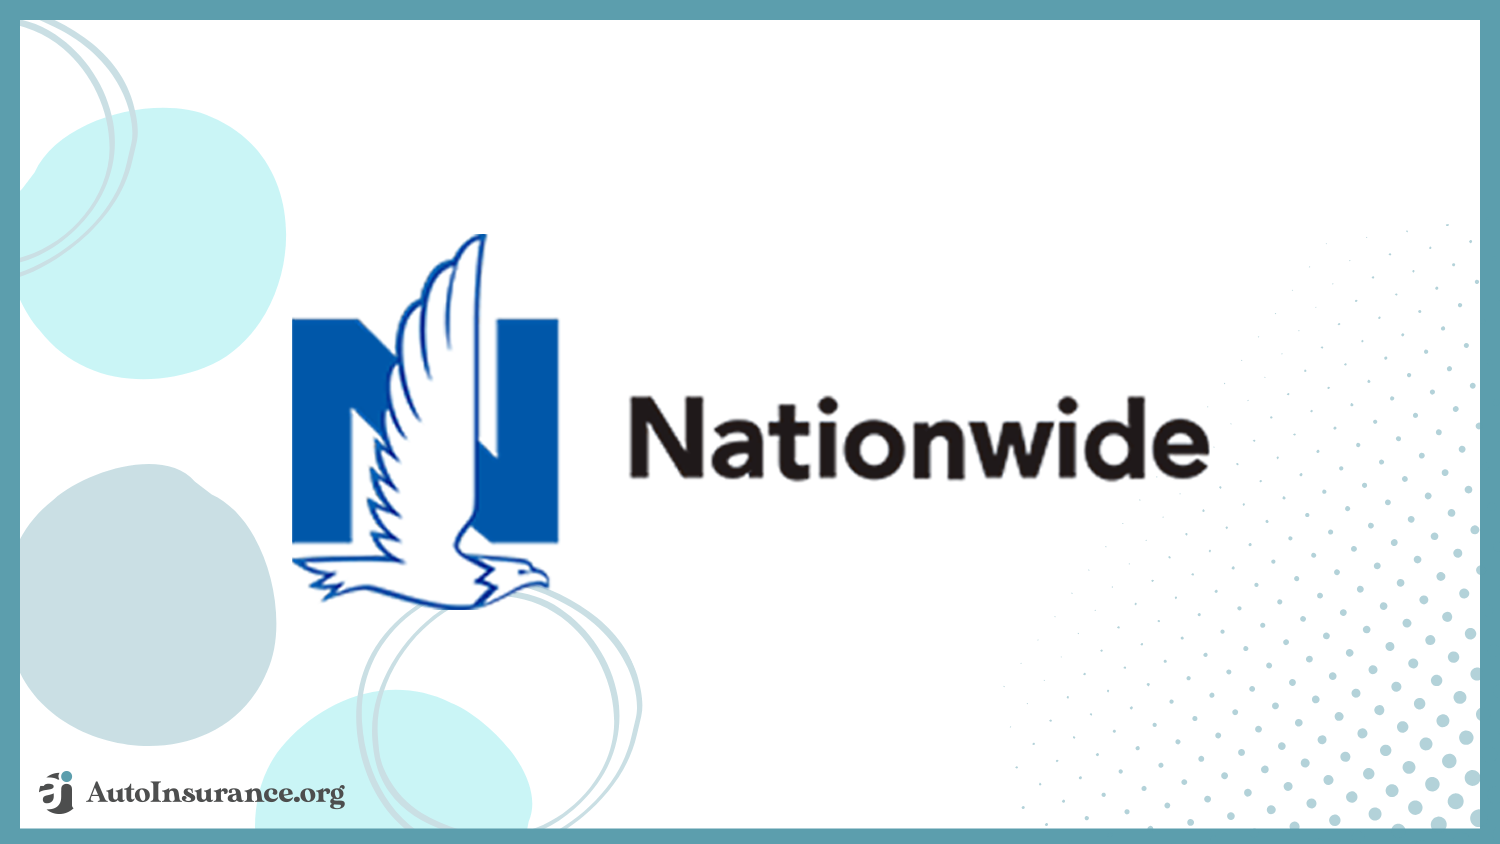 Nationwide: Best Auto Insurance for Dealerships